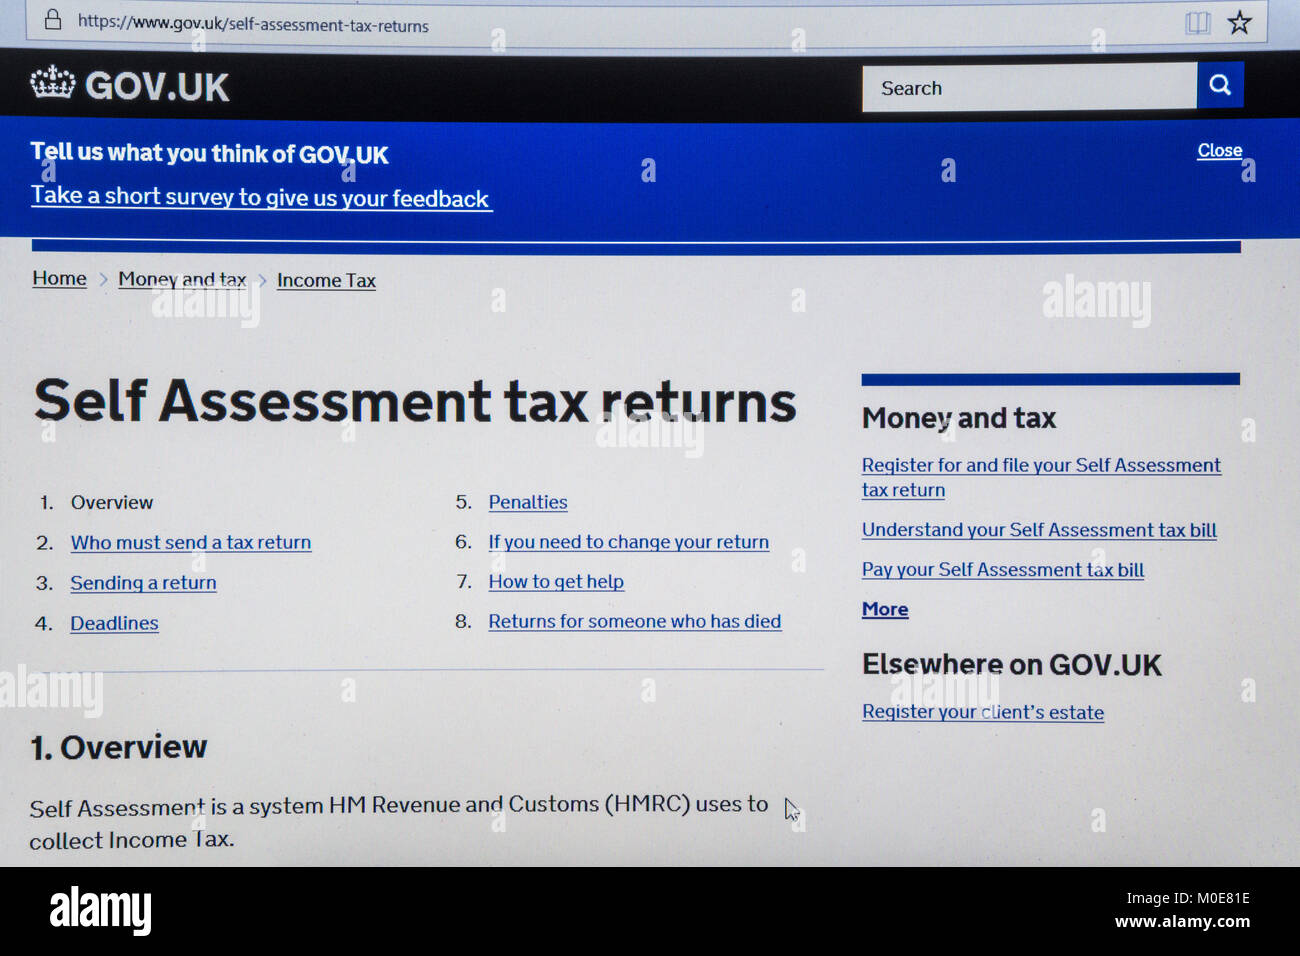 computer-screenshot-with-gov-uk-website-showing-self-assessment-tax